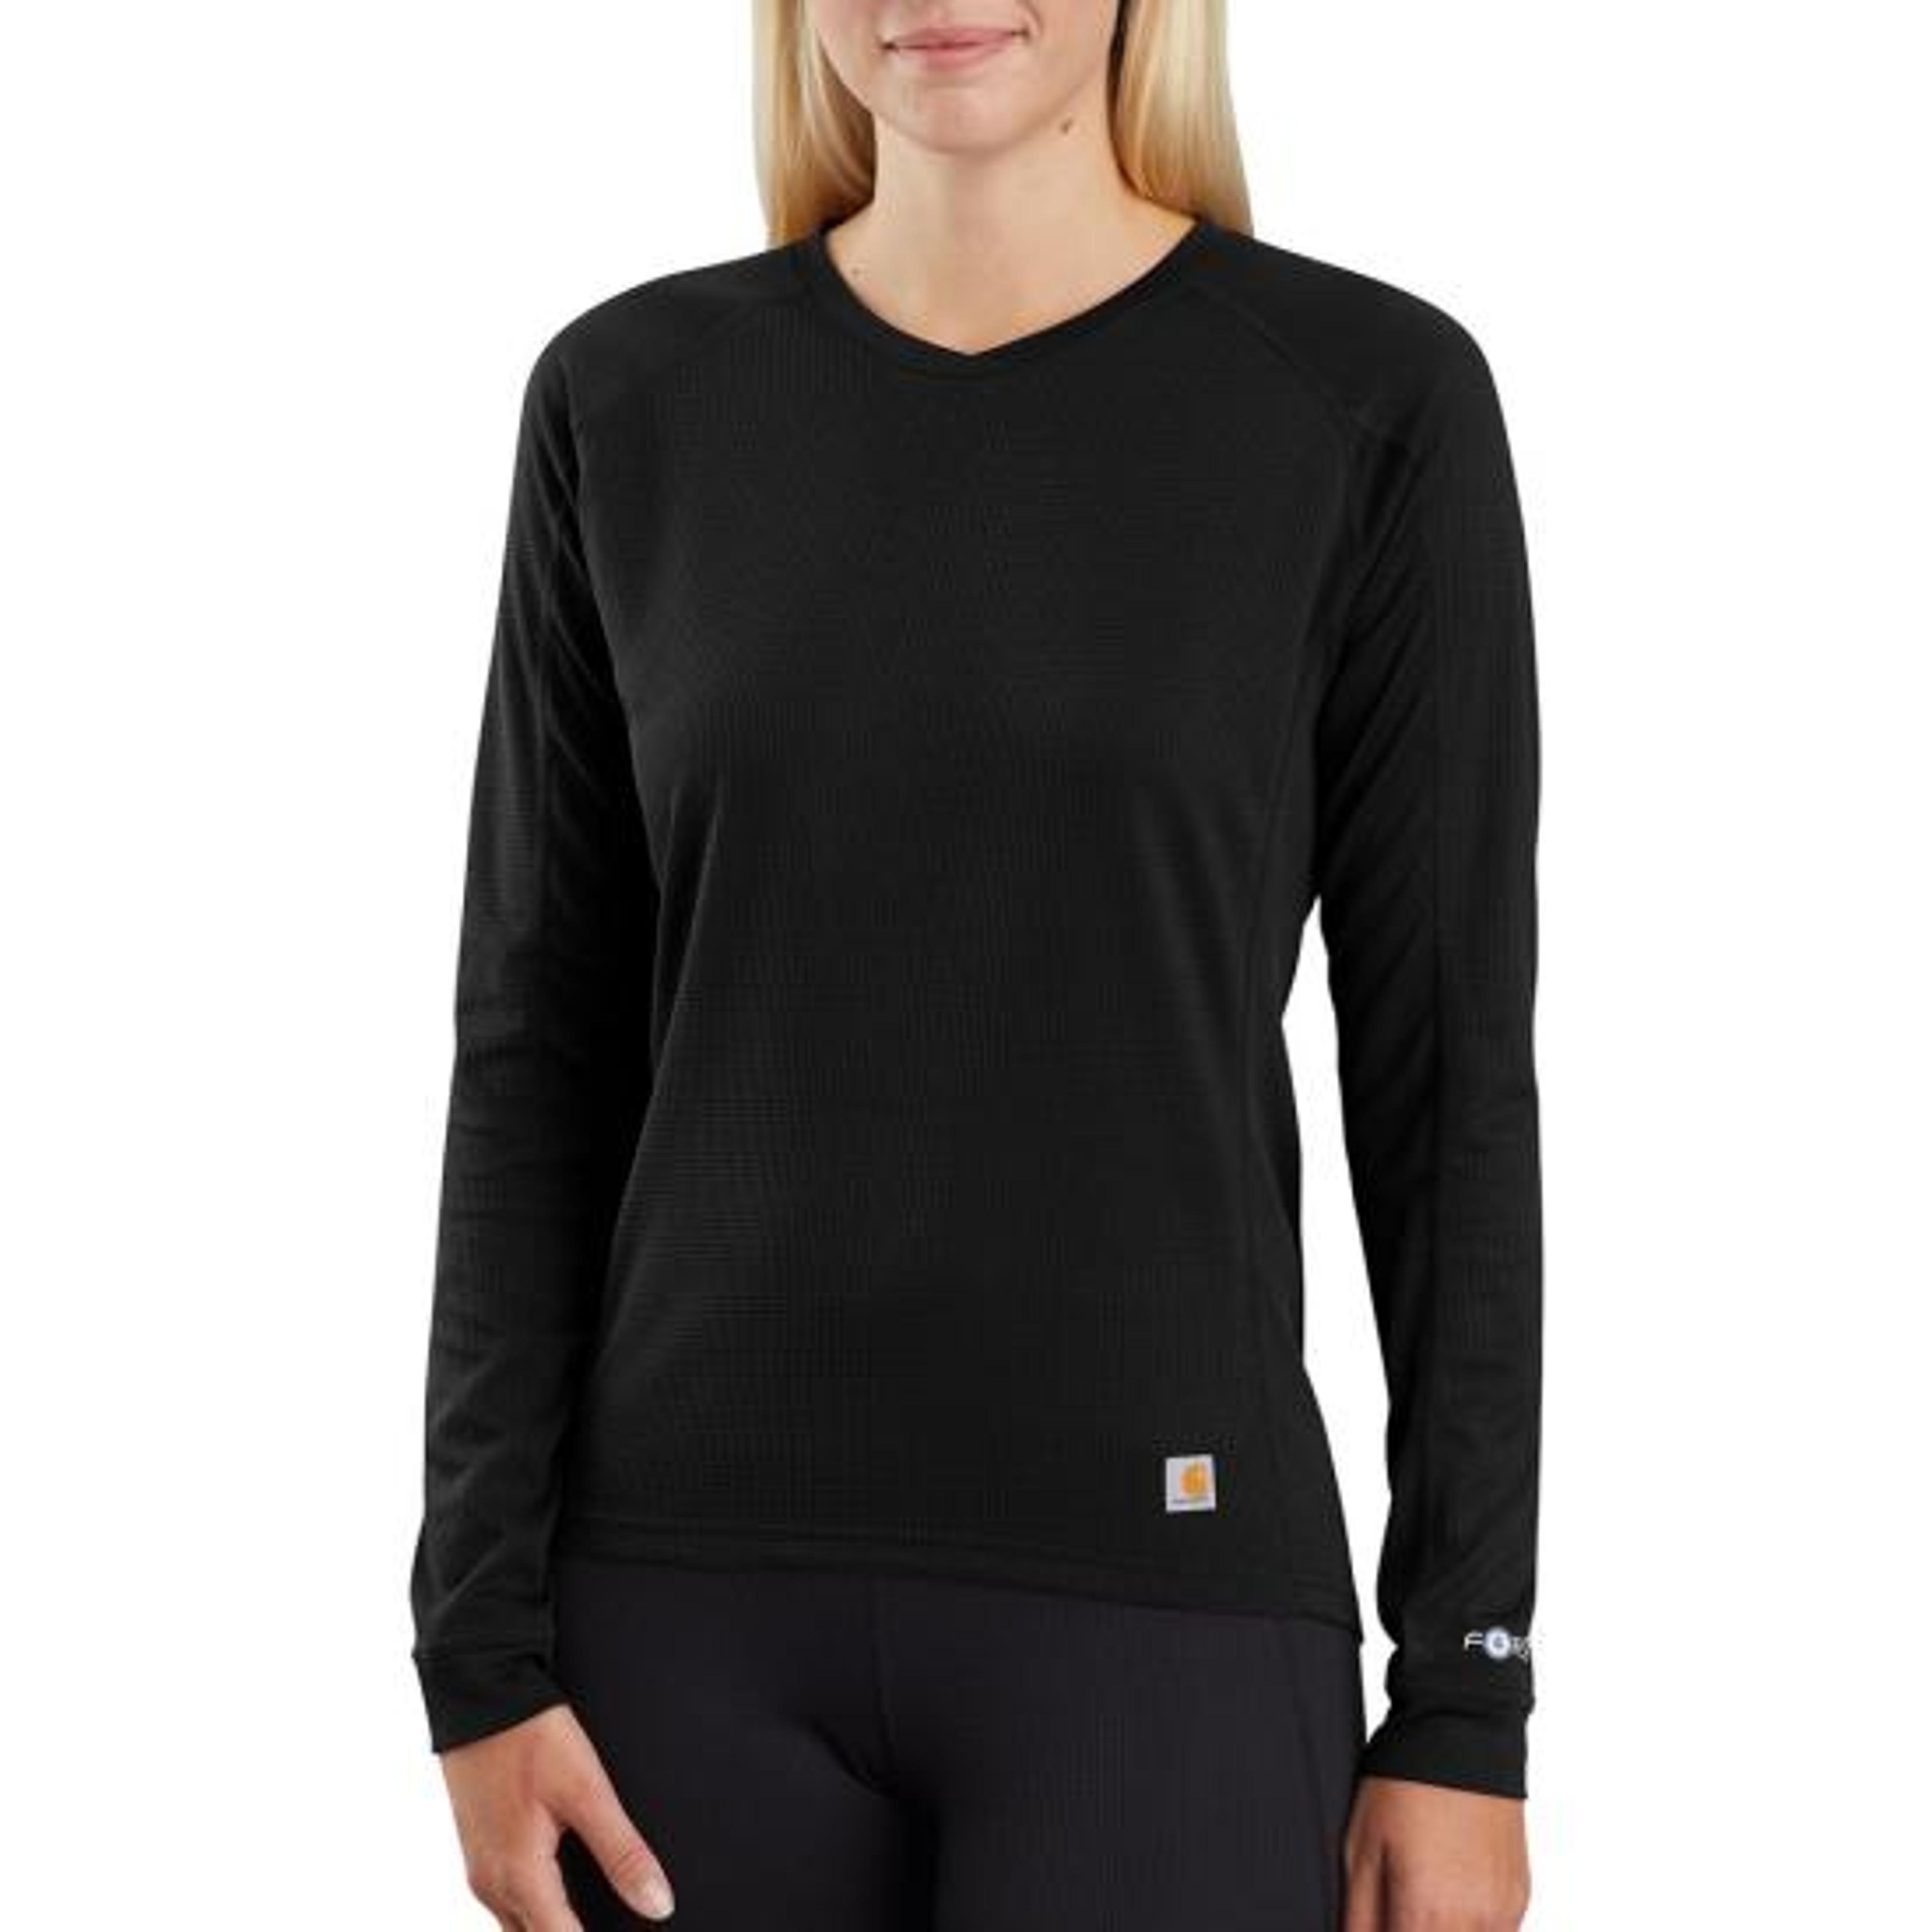  Women's Base Force Midweight Top